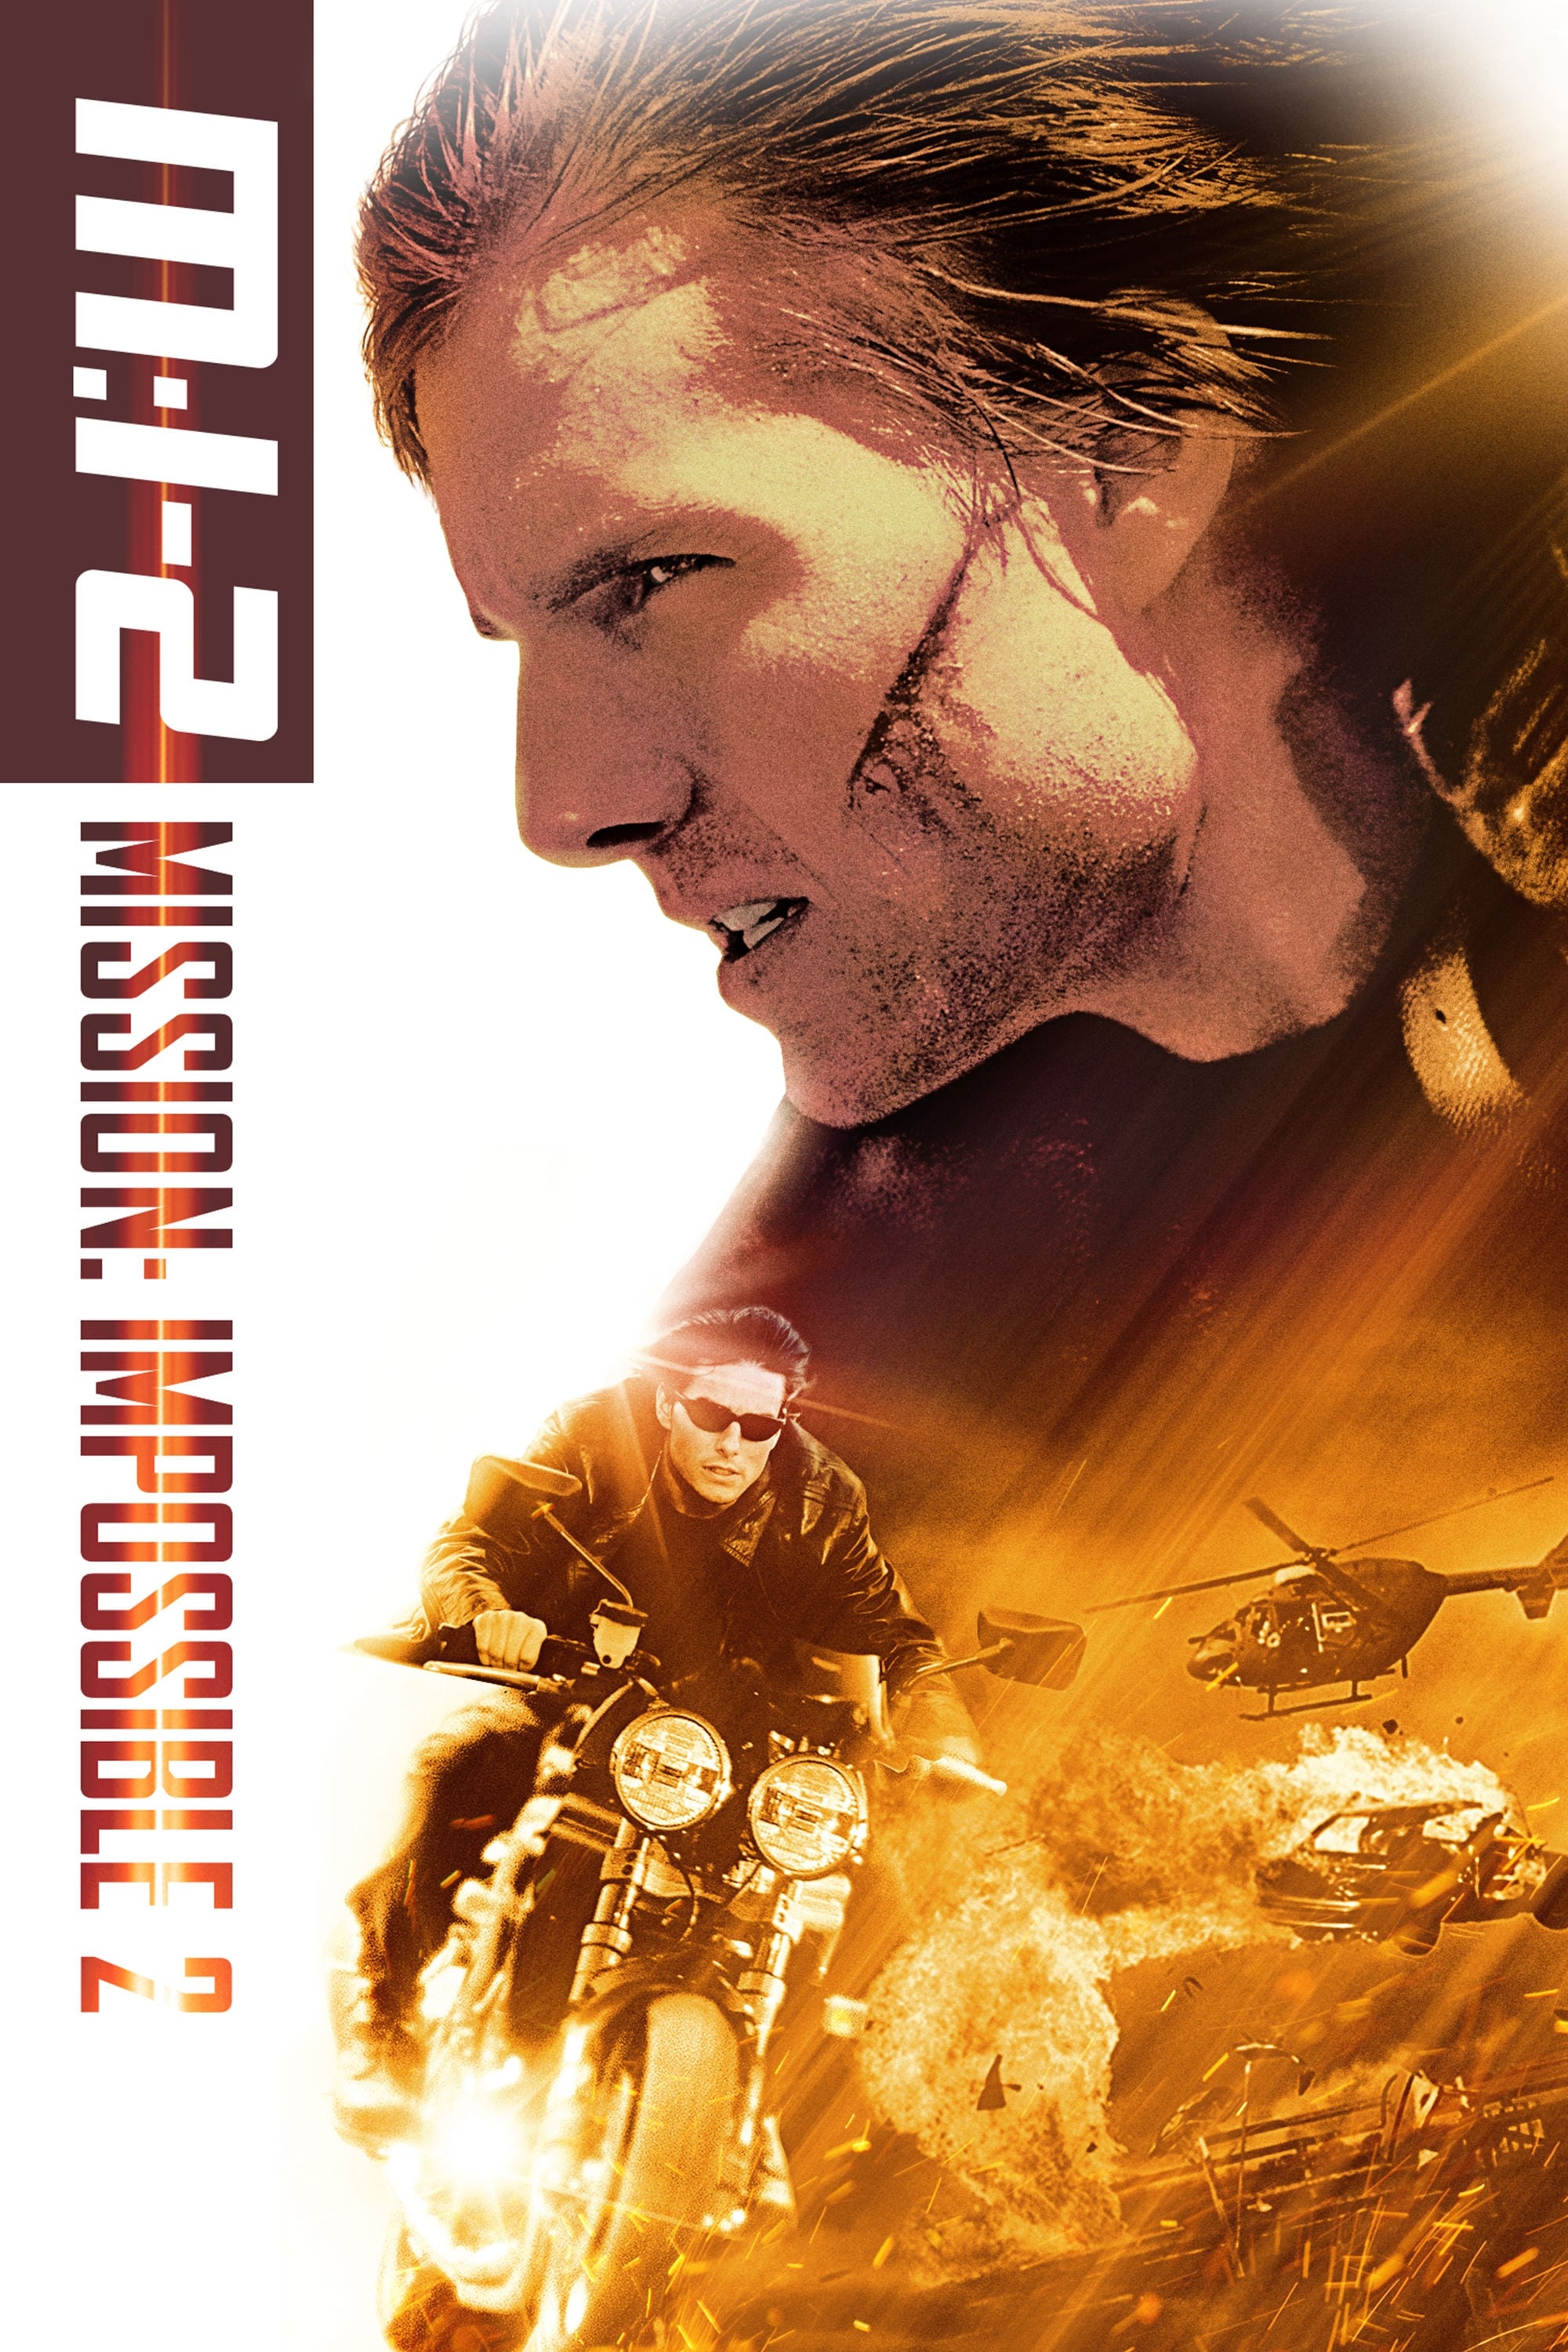 Mission Impossible 2 (2000) Movie Download Hindi & English Dual Audio Bluray 480p 720p 1080p 2160p 4K 60Fps Remux